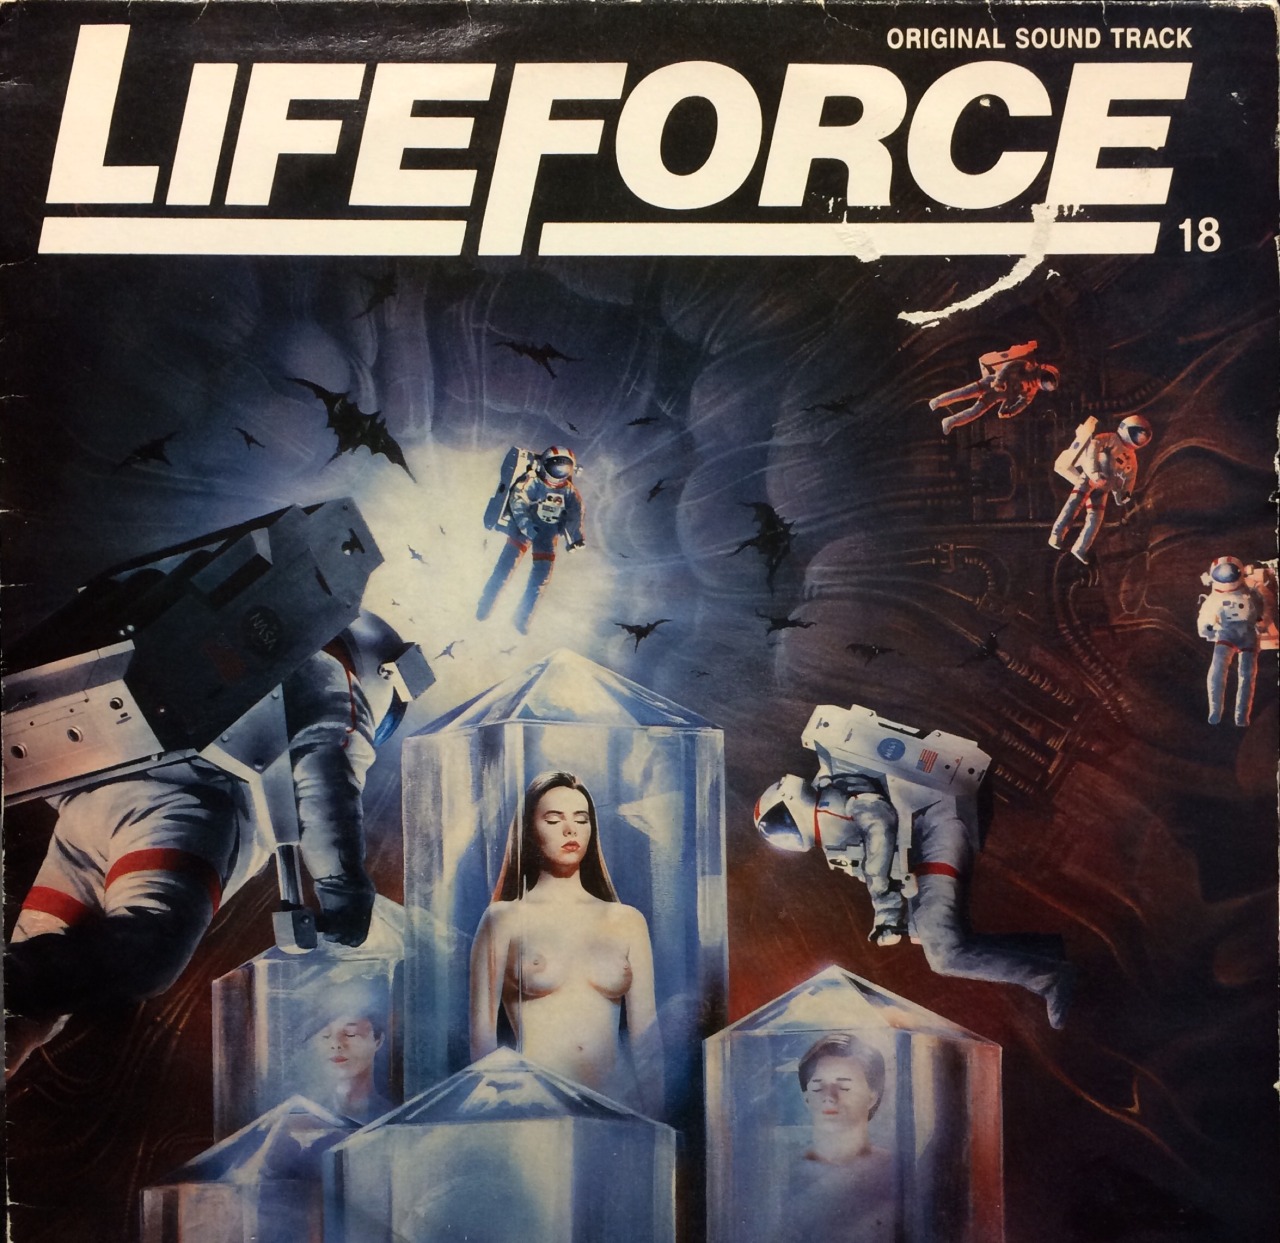 Lifeforce, Original Soundtrack by Henry Mancini (1985, Red Bus Records)From a charity